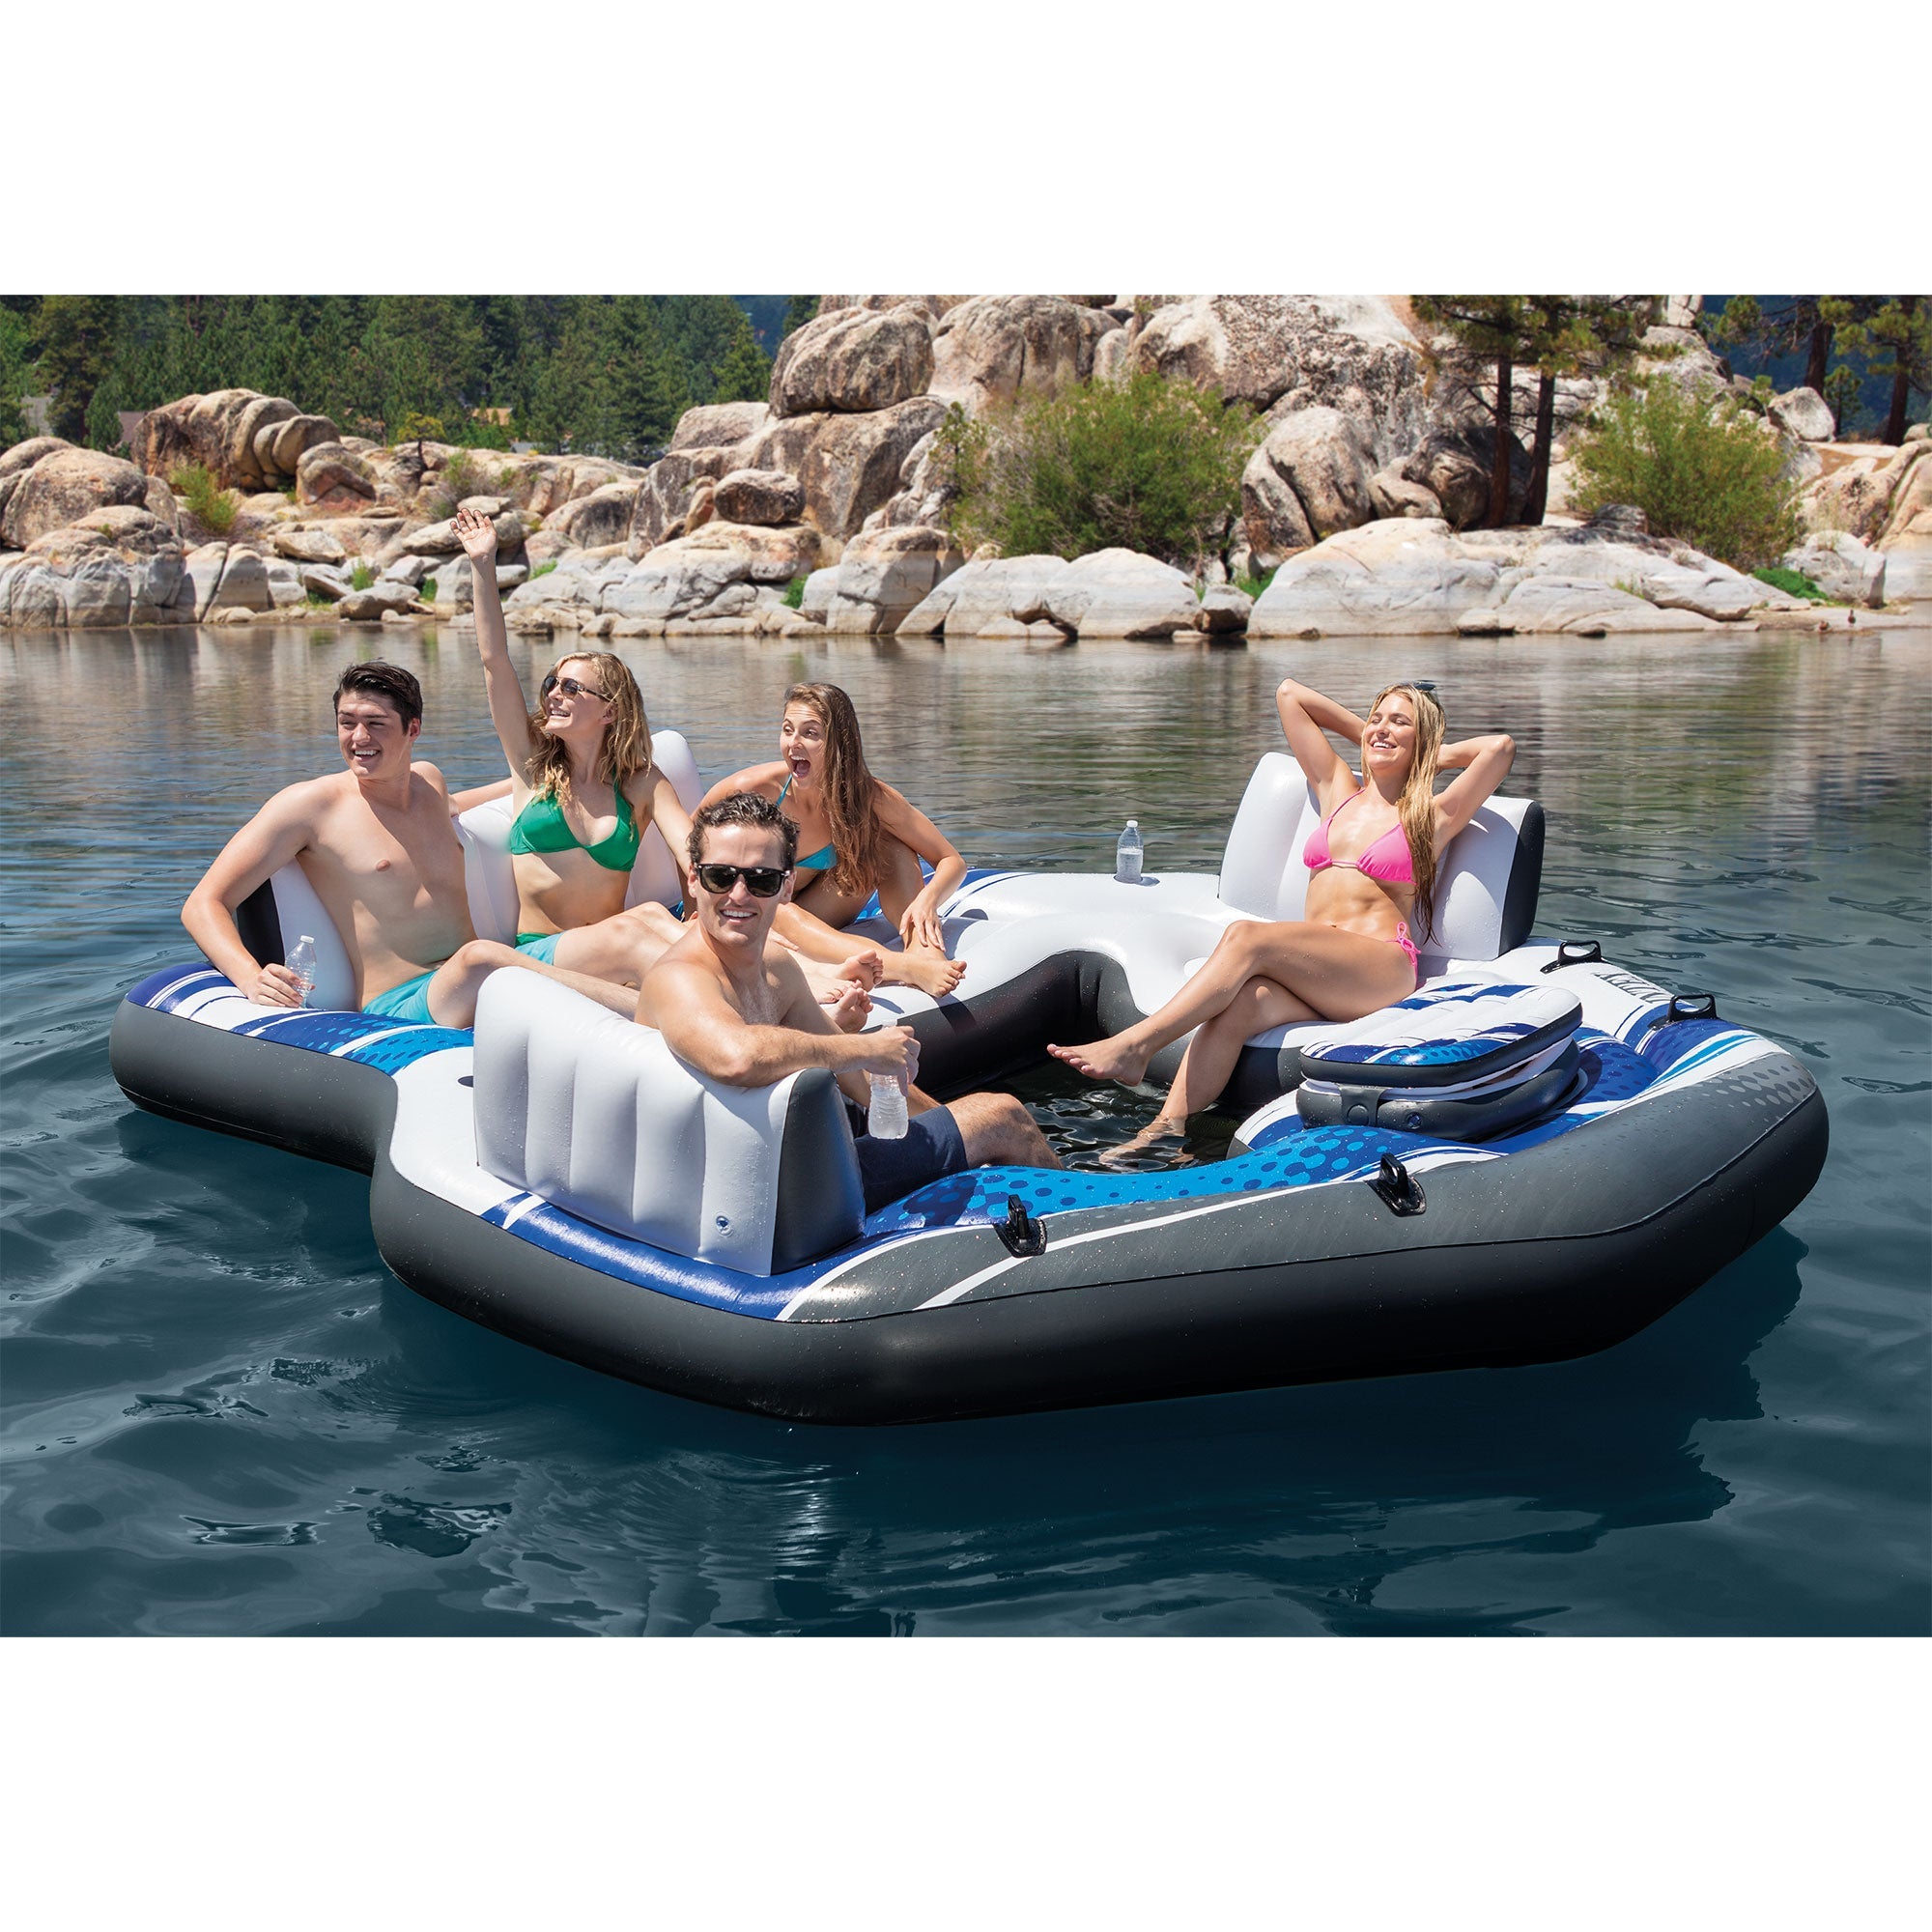 Intex-Blue-Tropic-Inflatable-Lake-Island-Water-Float-with-Cooler-and-Cupholders-Pool-Floats-&-Loungers